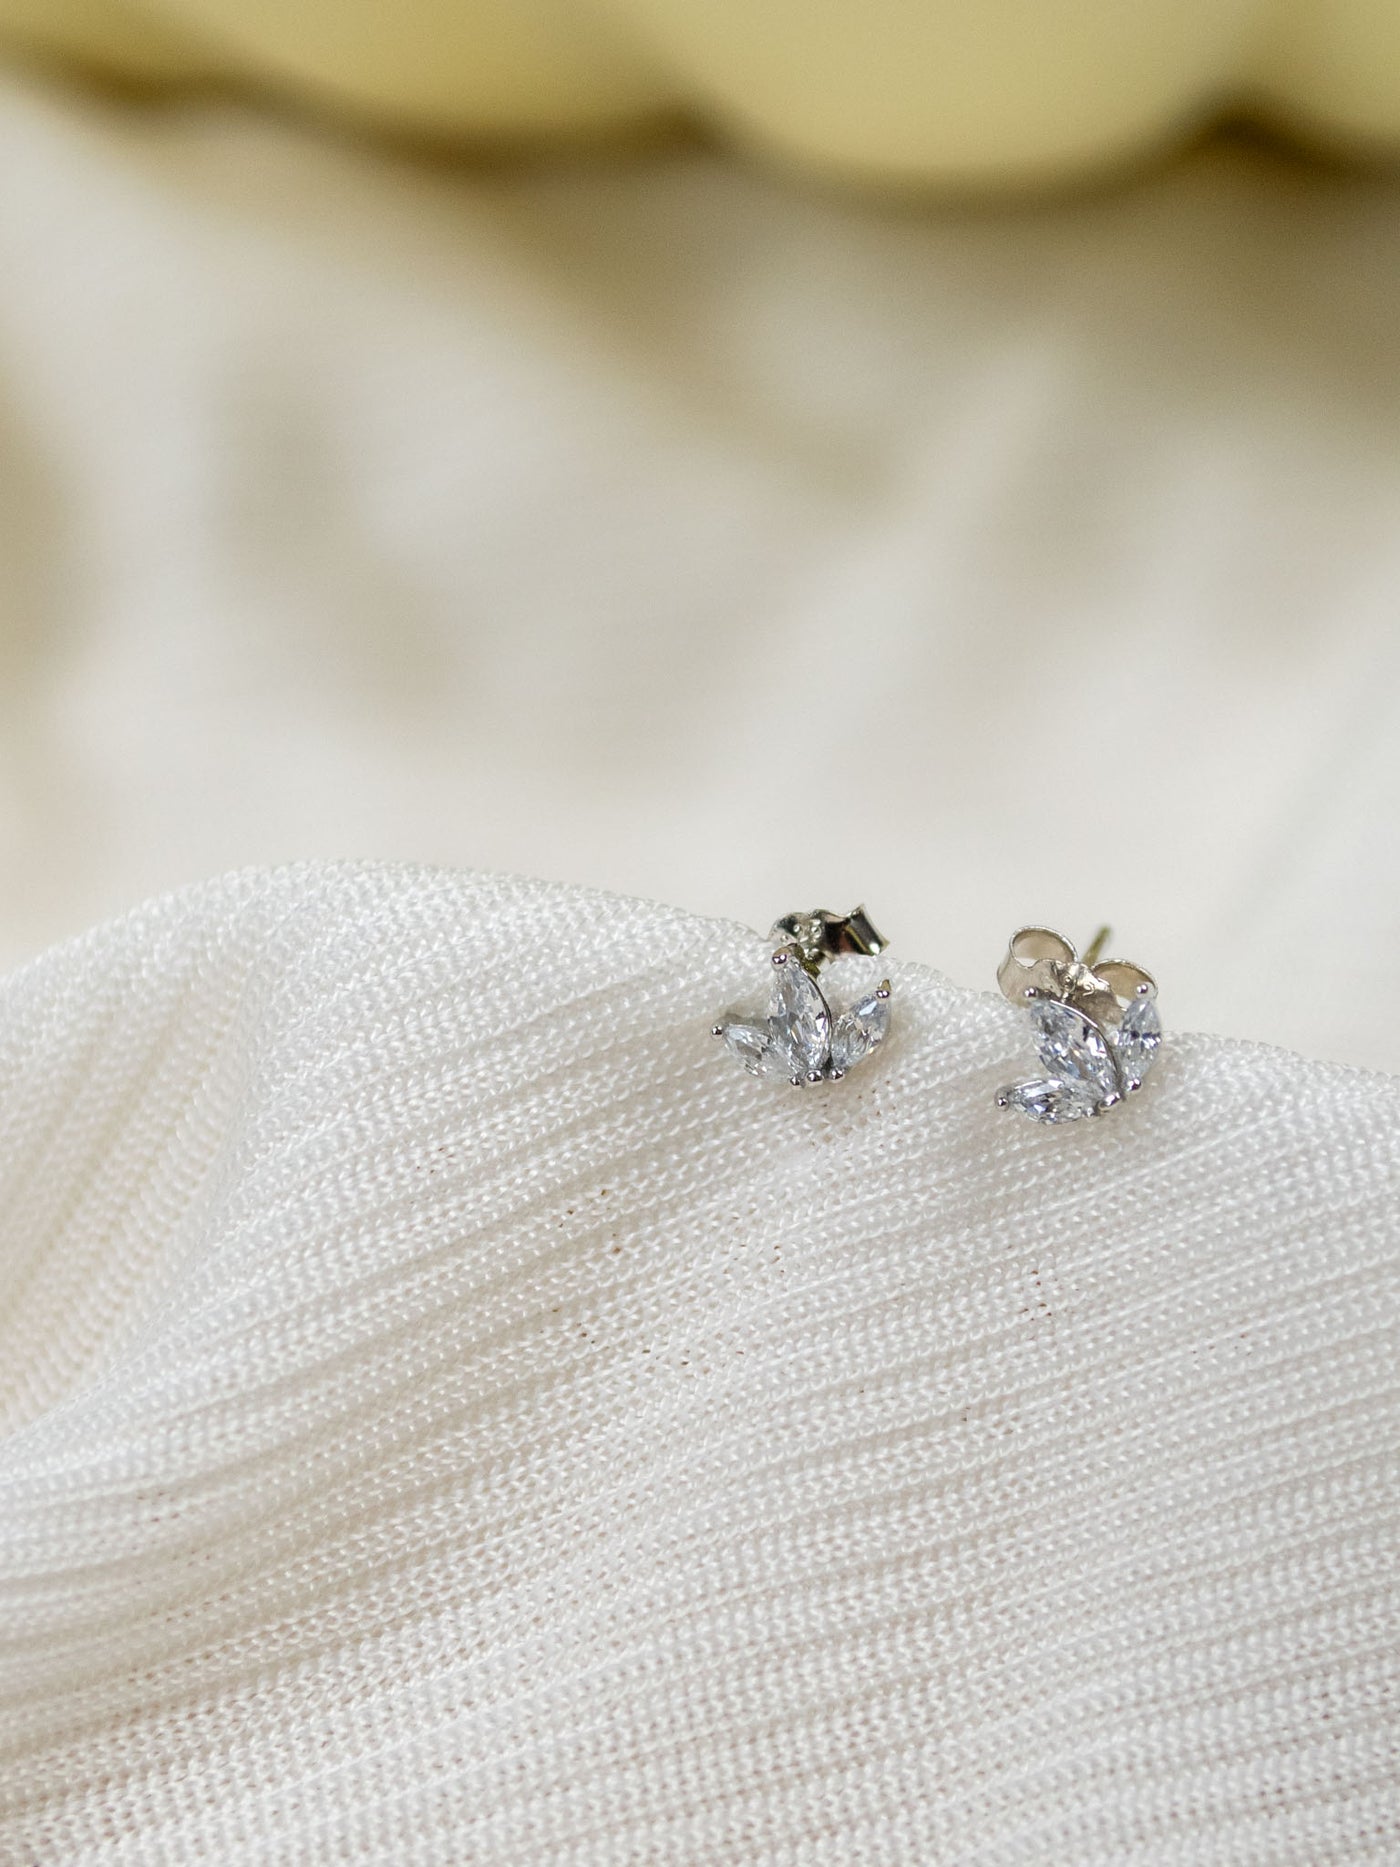 A pair of silver CZ stone stud earrings in a lotus shape.